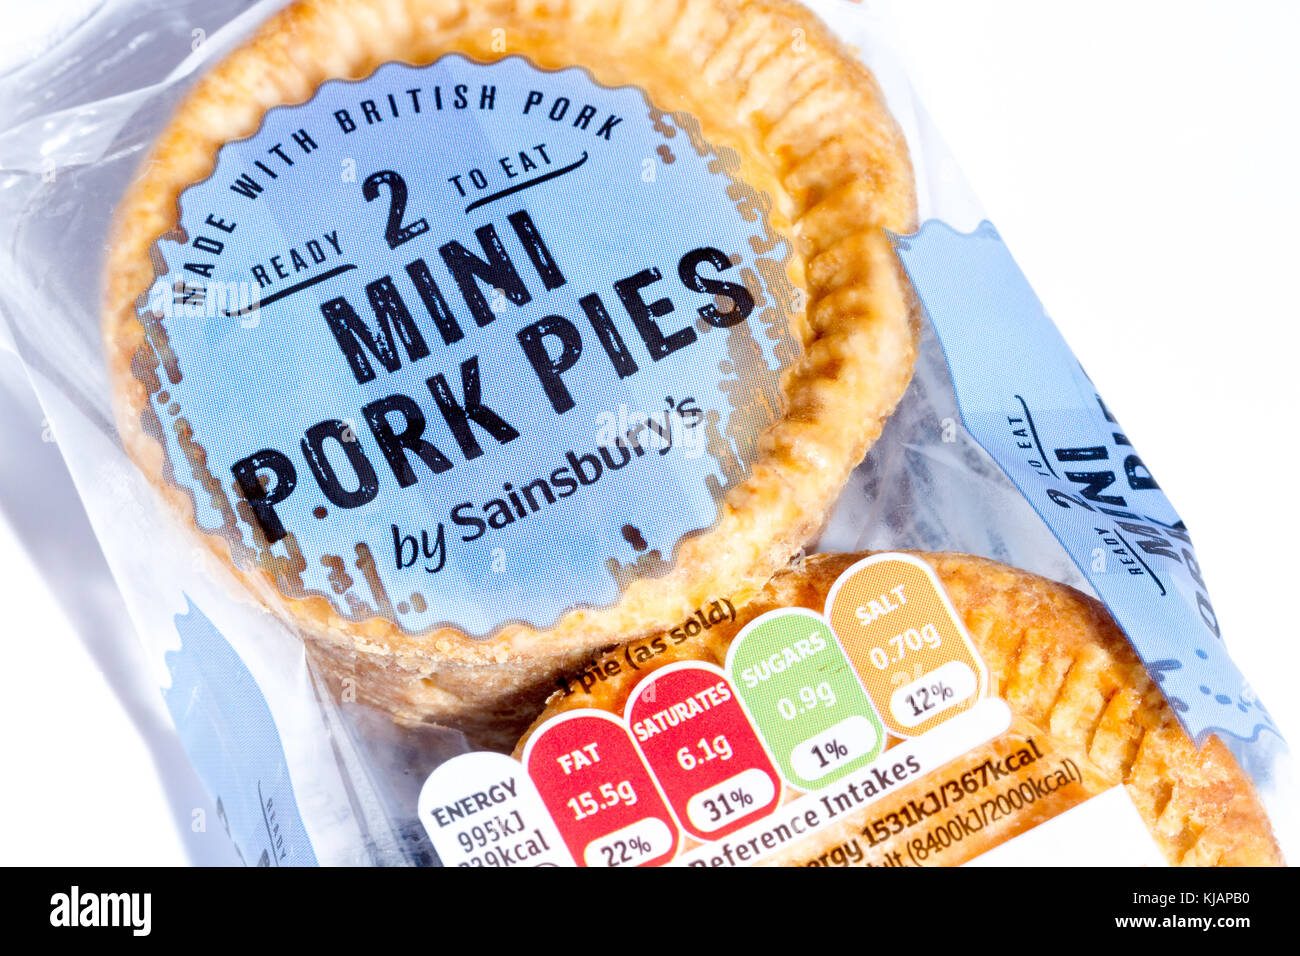 Close up of a pack of Sainsbury's 2 mini pork pies with the traffic light rating system nutritional information label, United Kingdom Stock Photo